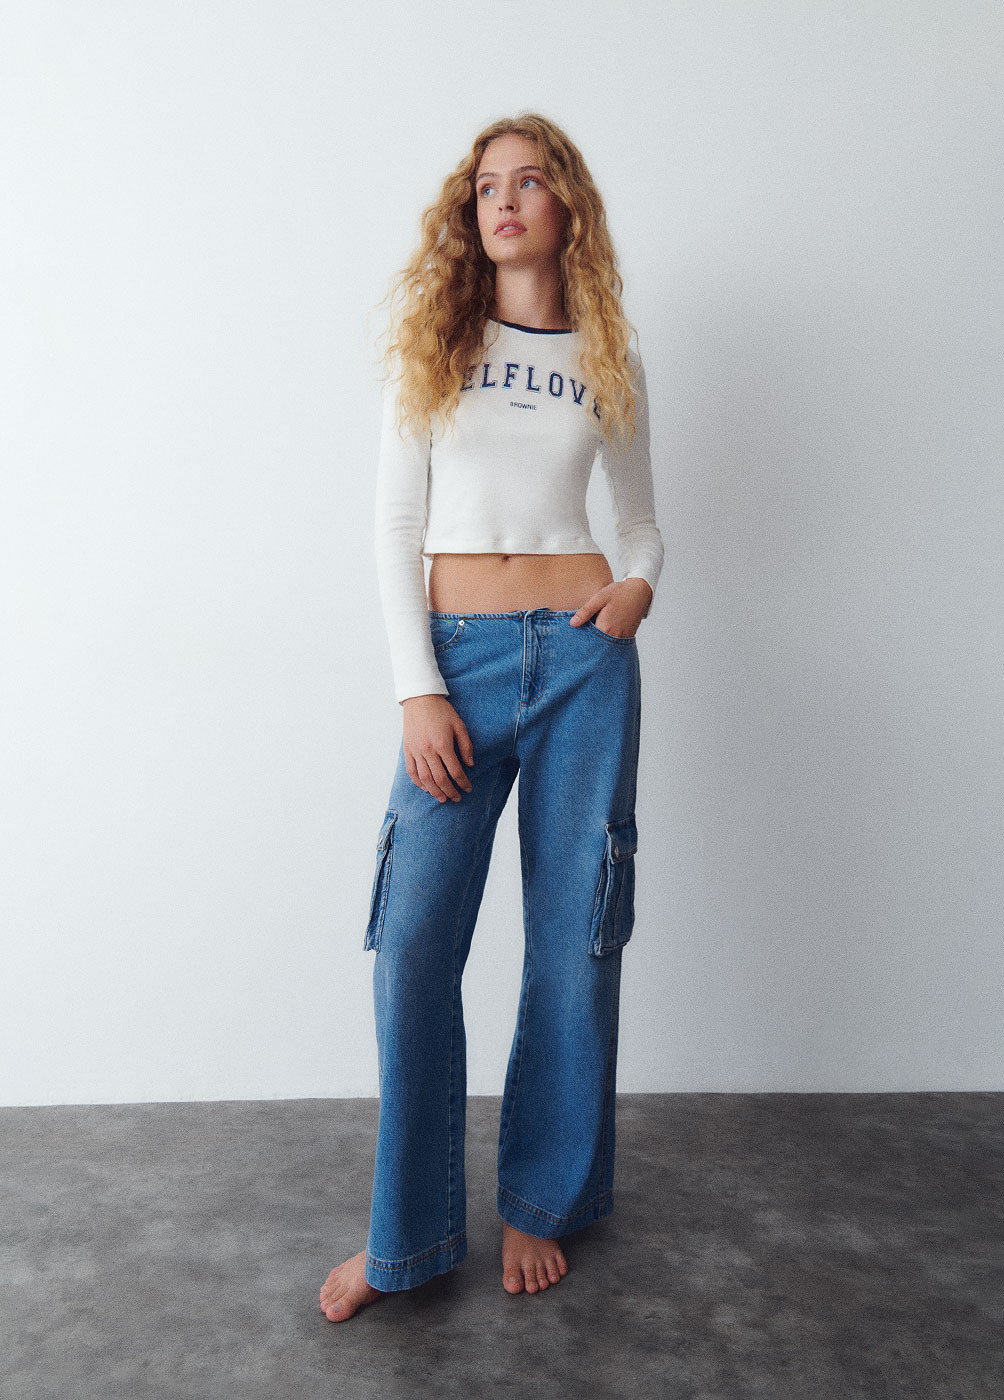 LOW-RISE CARGO JEANS